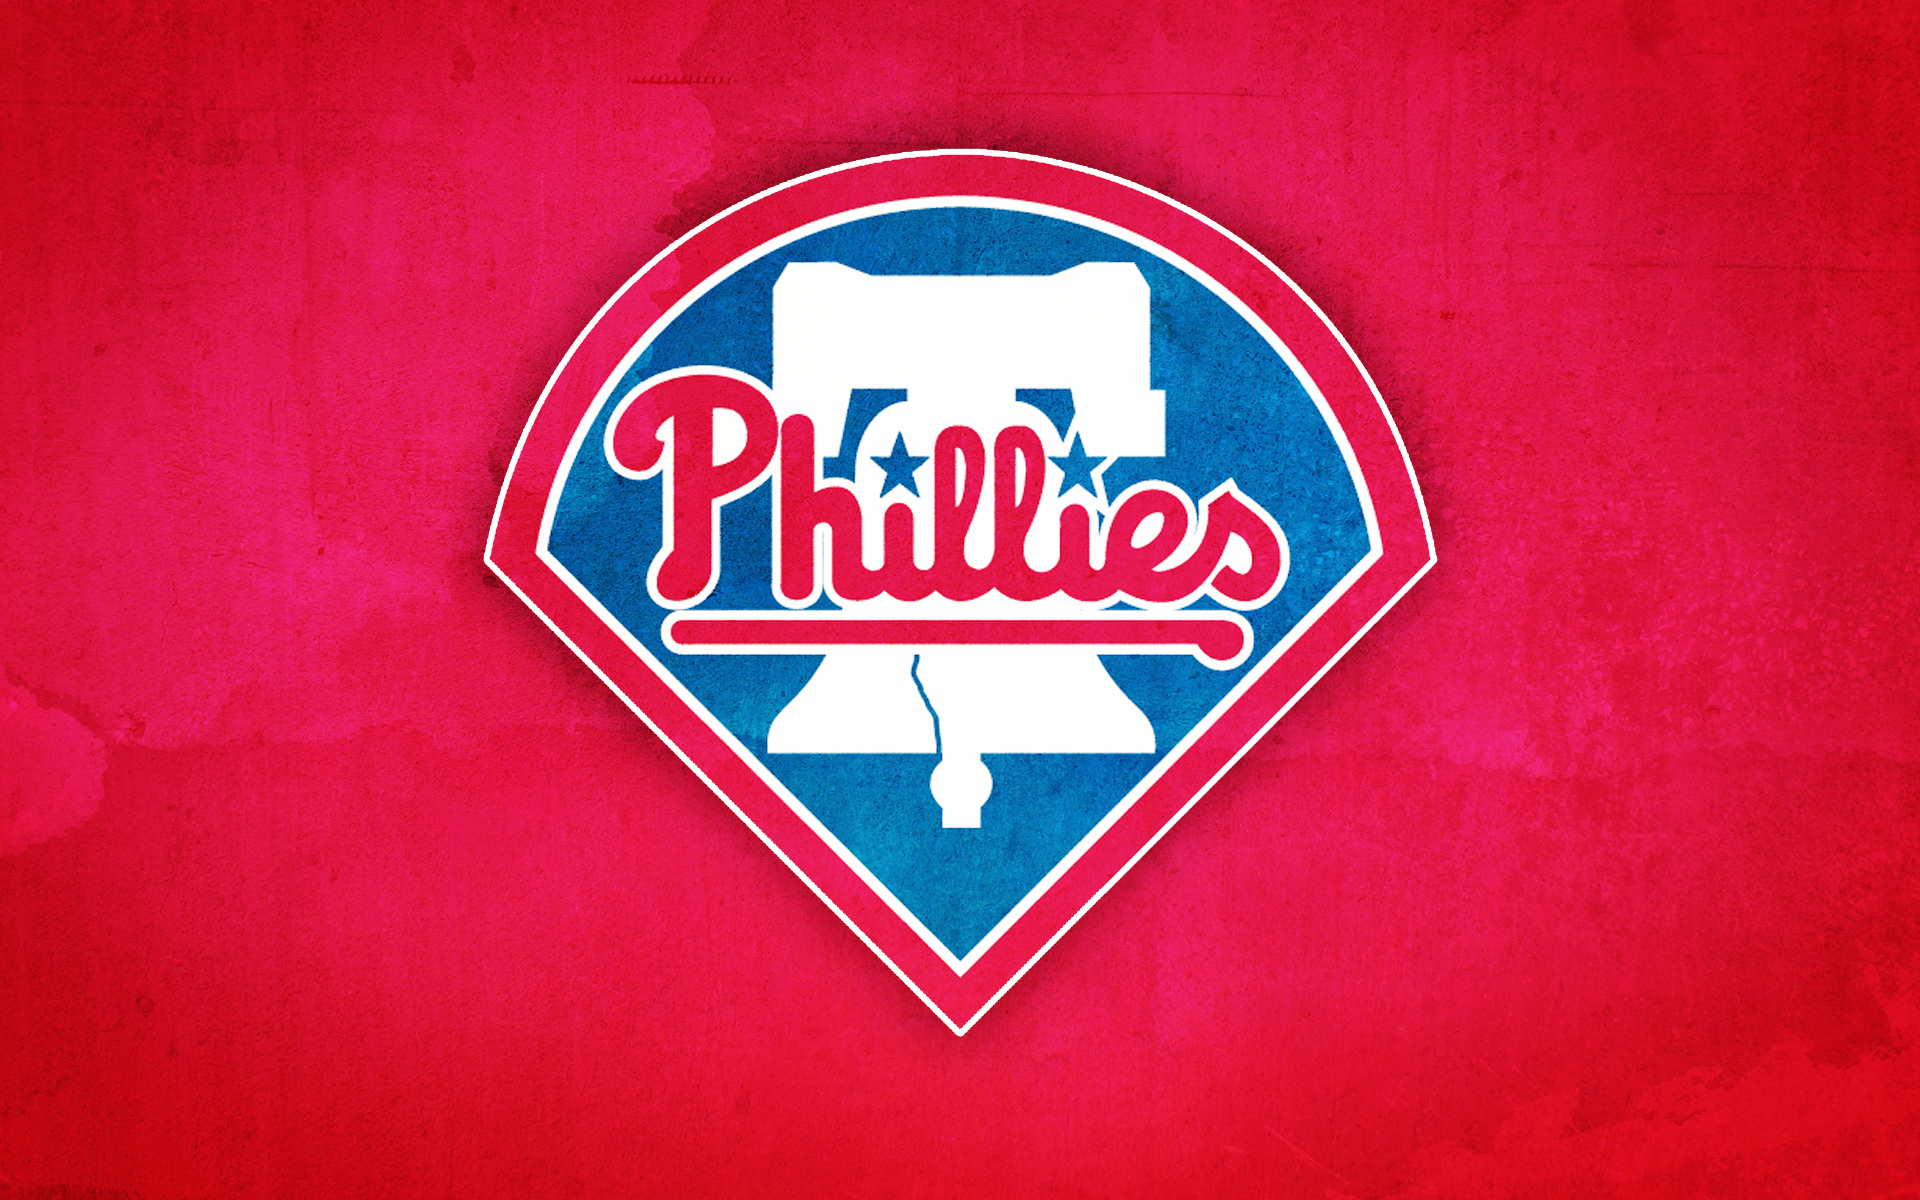 Phillies Logo on Red Stained Background 1920 x 1200 1024 x 640